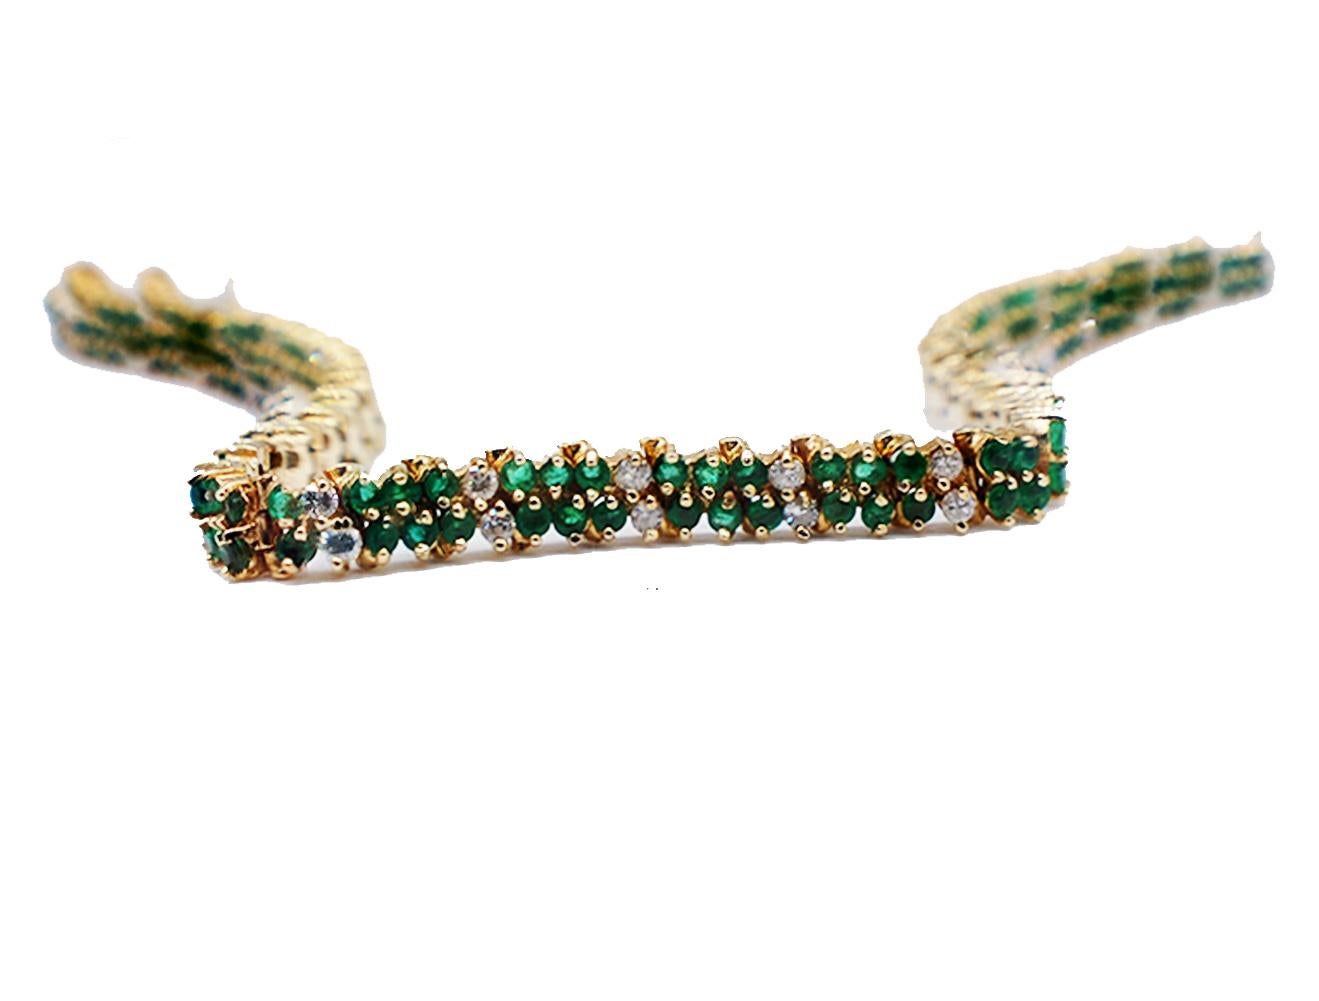 Beautiful mesh style tennis bracelet consisting emeralds and diamonds set in yellow gold.

There are 21 sets of emeralds consisting of (6) six pieces. The total weight of the 126 emeralds which measure 2 mm each weighing an estimated 3.75 carats.

